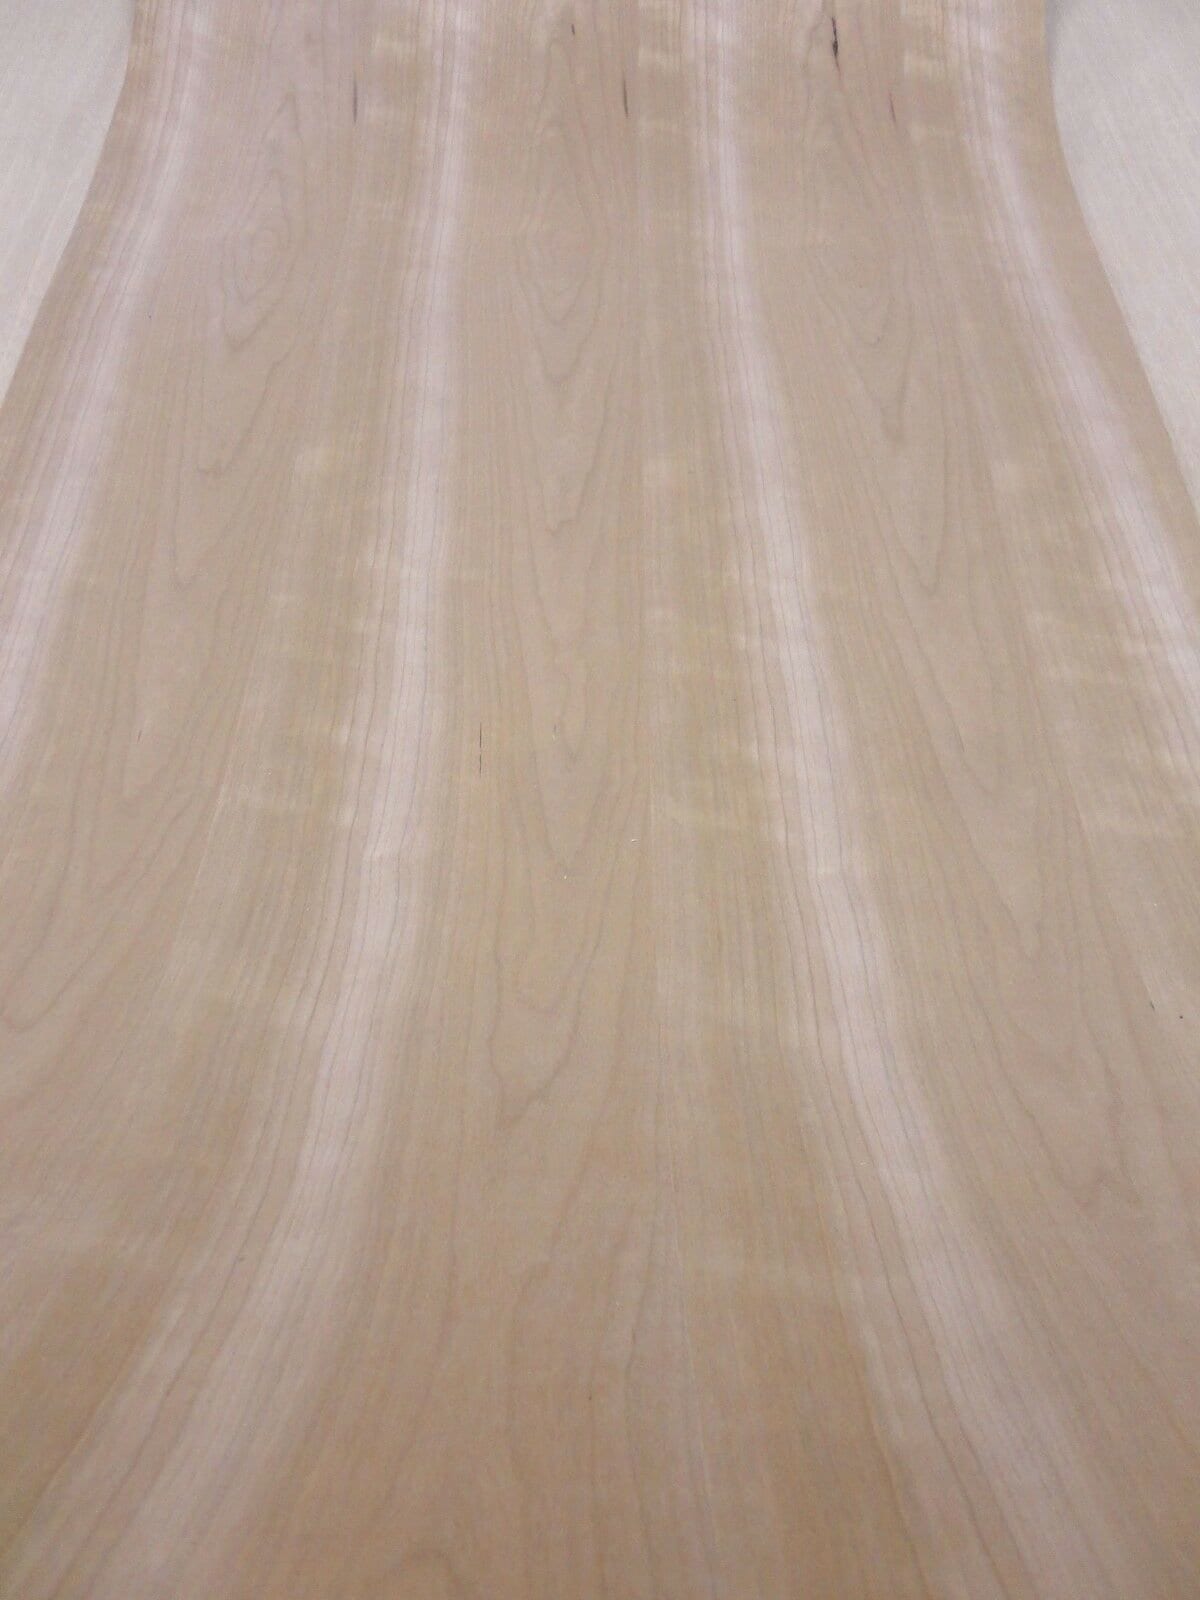 Cherry wood veneer 7" x 7" on paper backer "A" grade quality 1/40th" thickness 